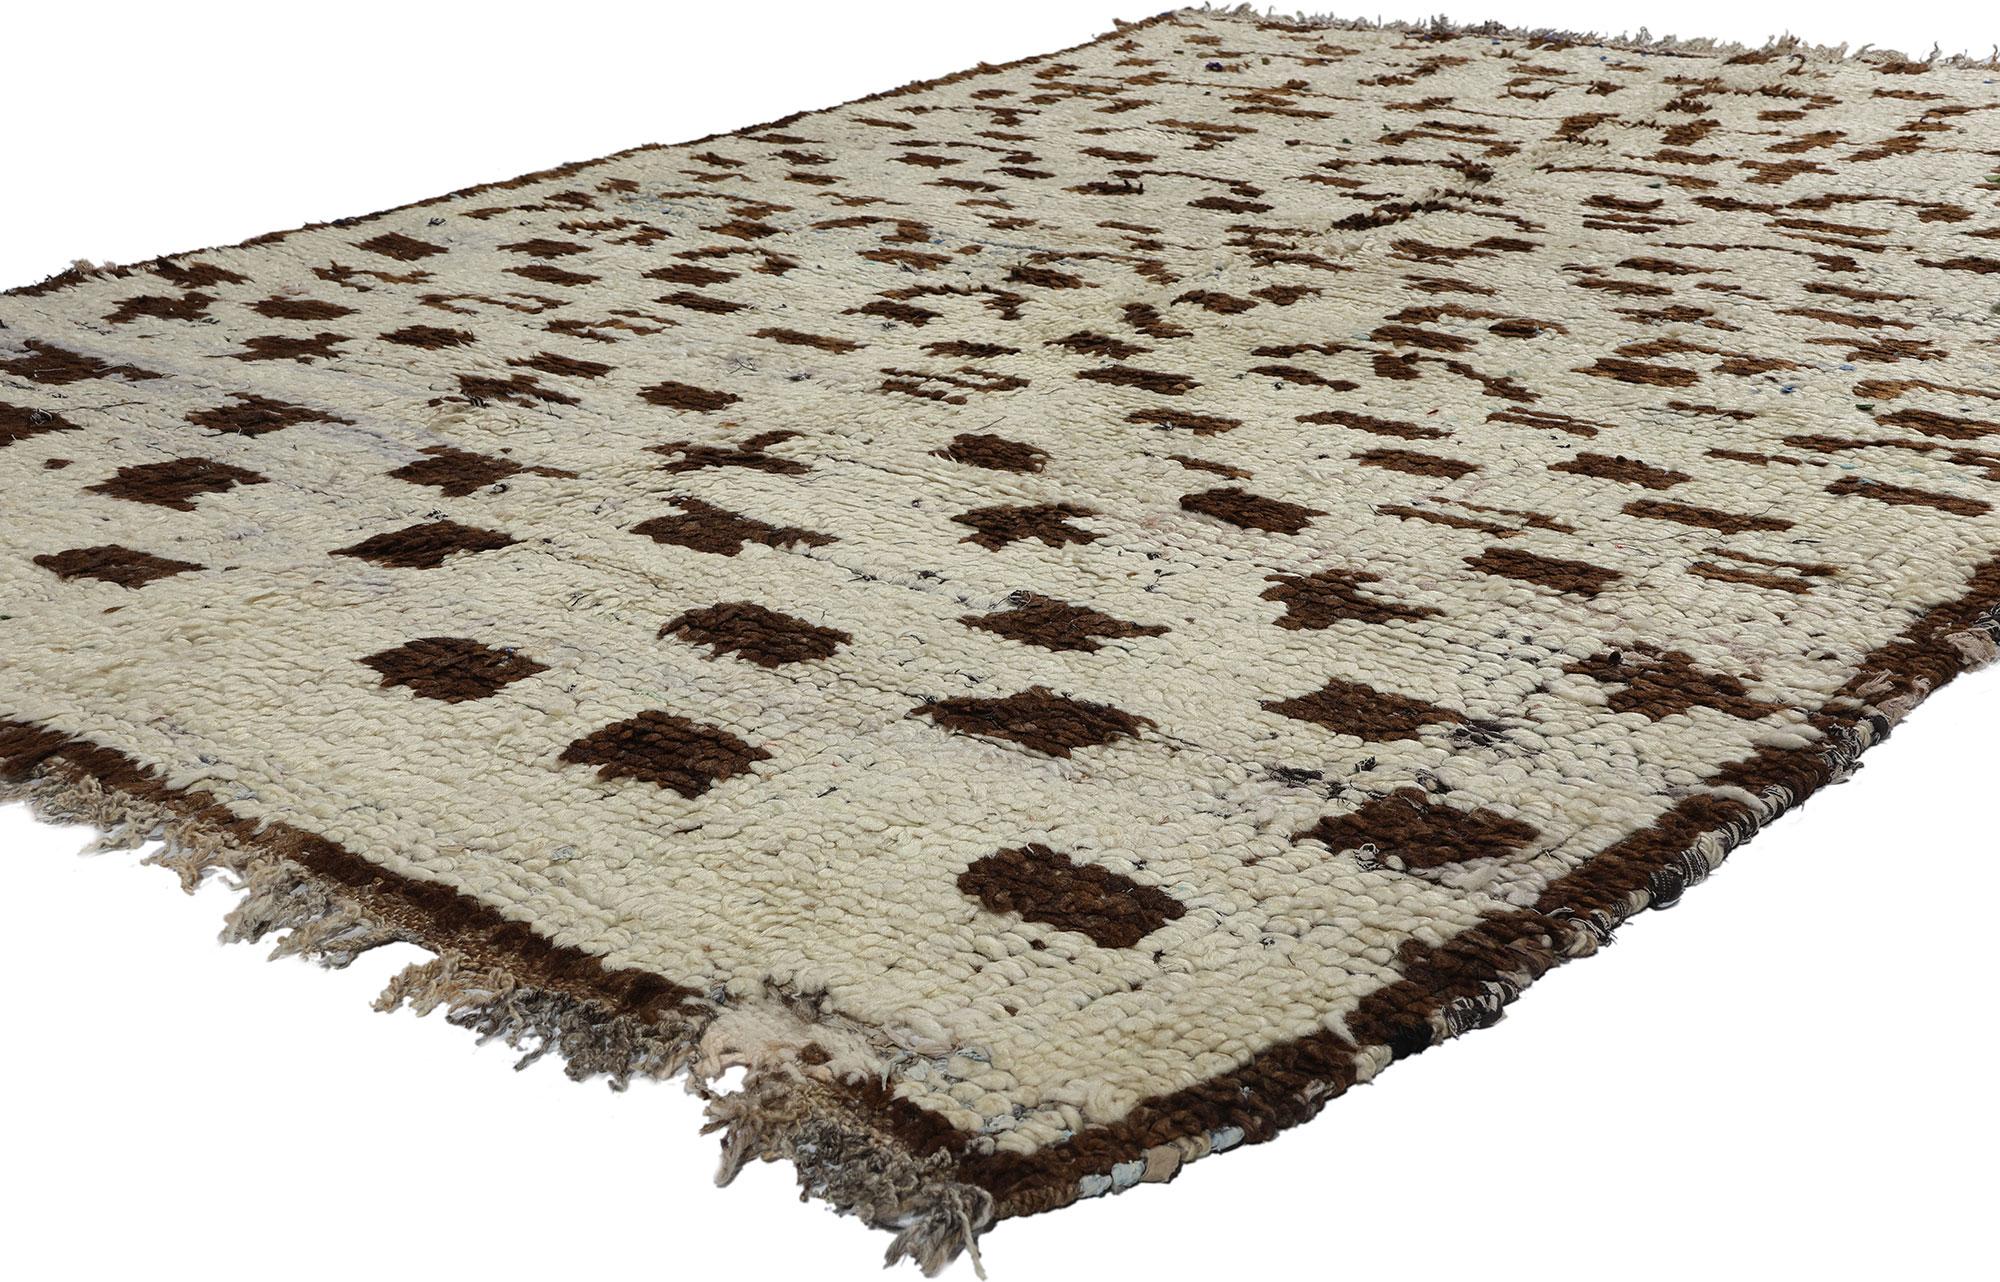 21817 Vintage Boucherouite Moroccan Azilal Rag Rug, 05'04 x 08'04. Azilal rag rugs, also known as Azilal Boucherouite rugs, exemplify sustainable craftsmanship originating from the Azilal region in the Atlas Mountains of Morocco. Crafted by Berber